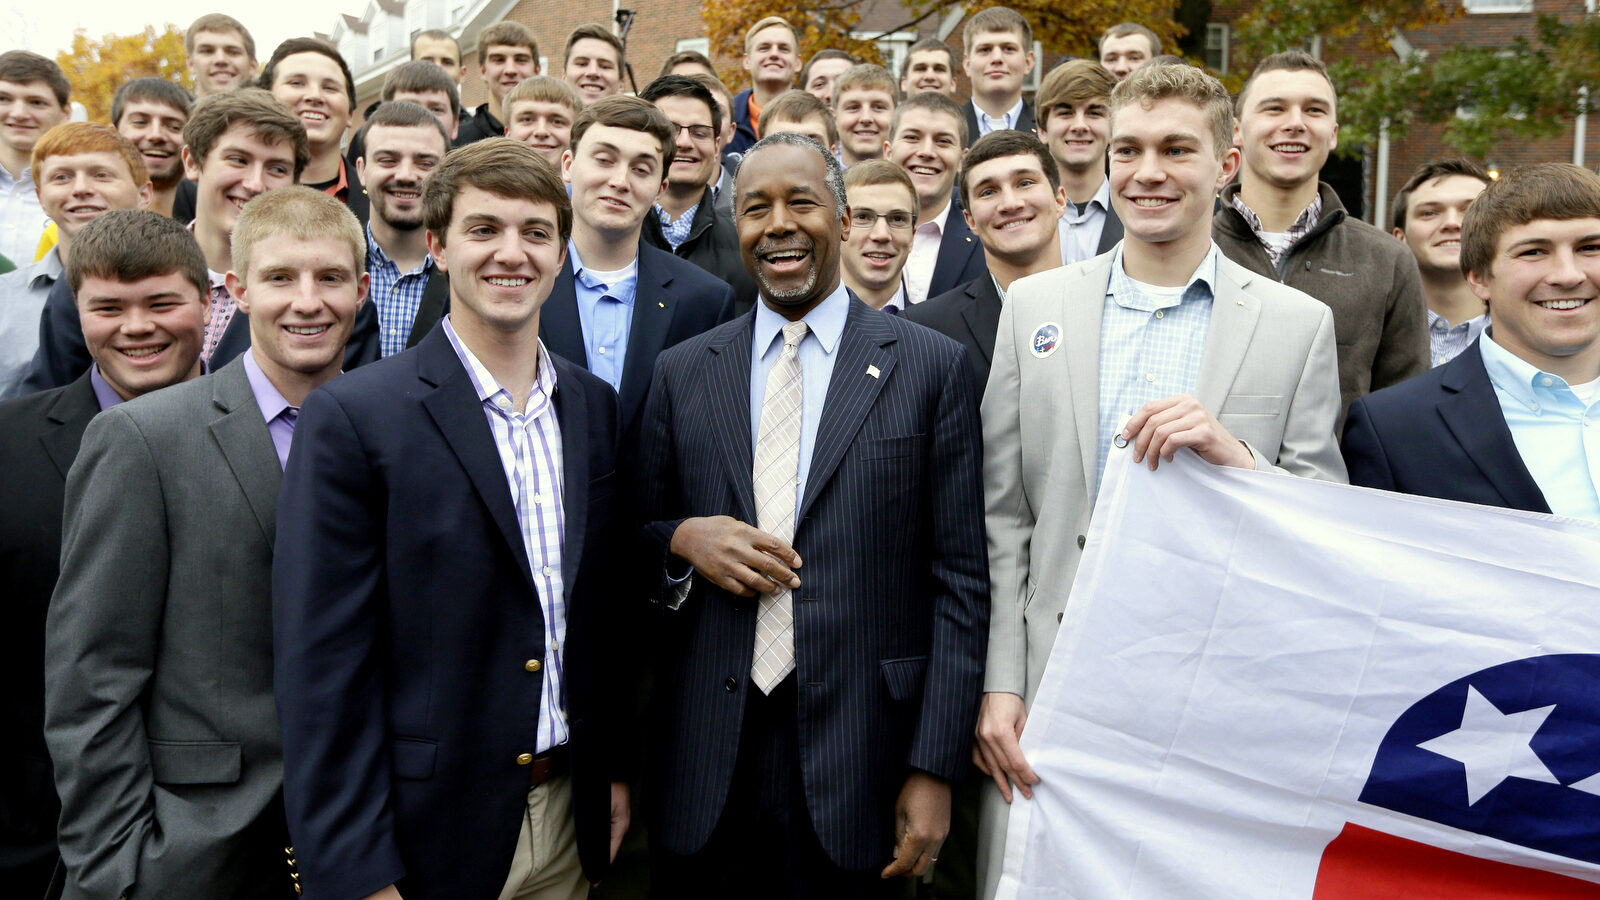 Republican presidential candidate Dr. Ben Carson poses for a photo with Alpha Gamma Rho fraternity members at Iowa State University following a campaign stop, Saturday, Oct. 24, 2015, in Ames, Iowa. (AP Photo/Charlie Neibergall)